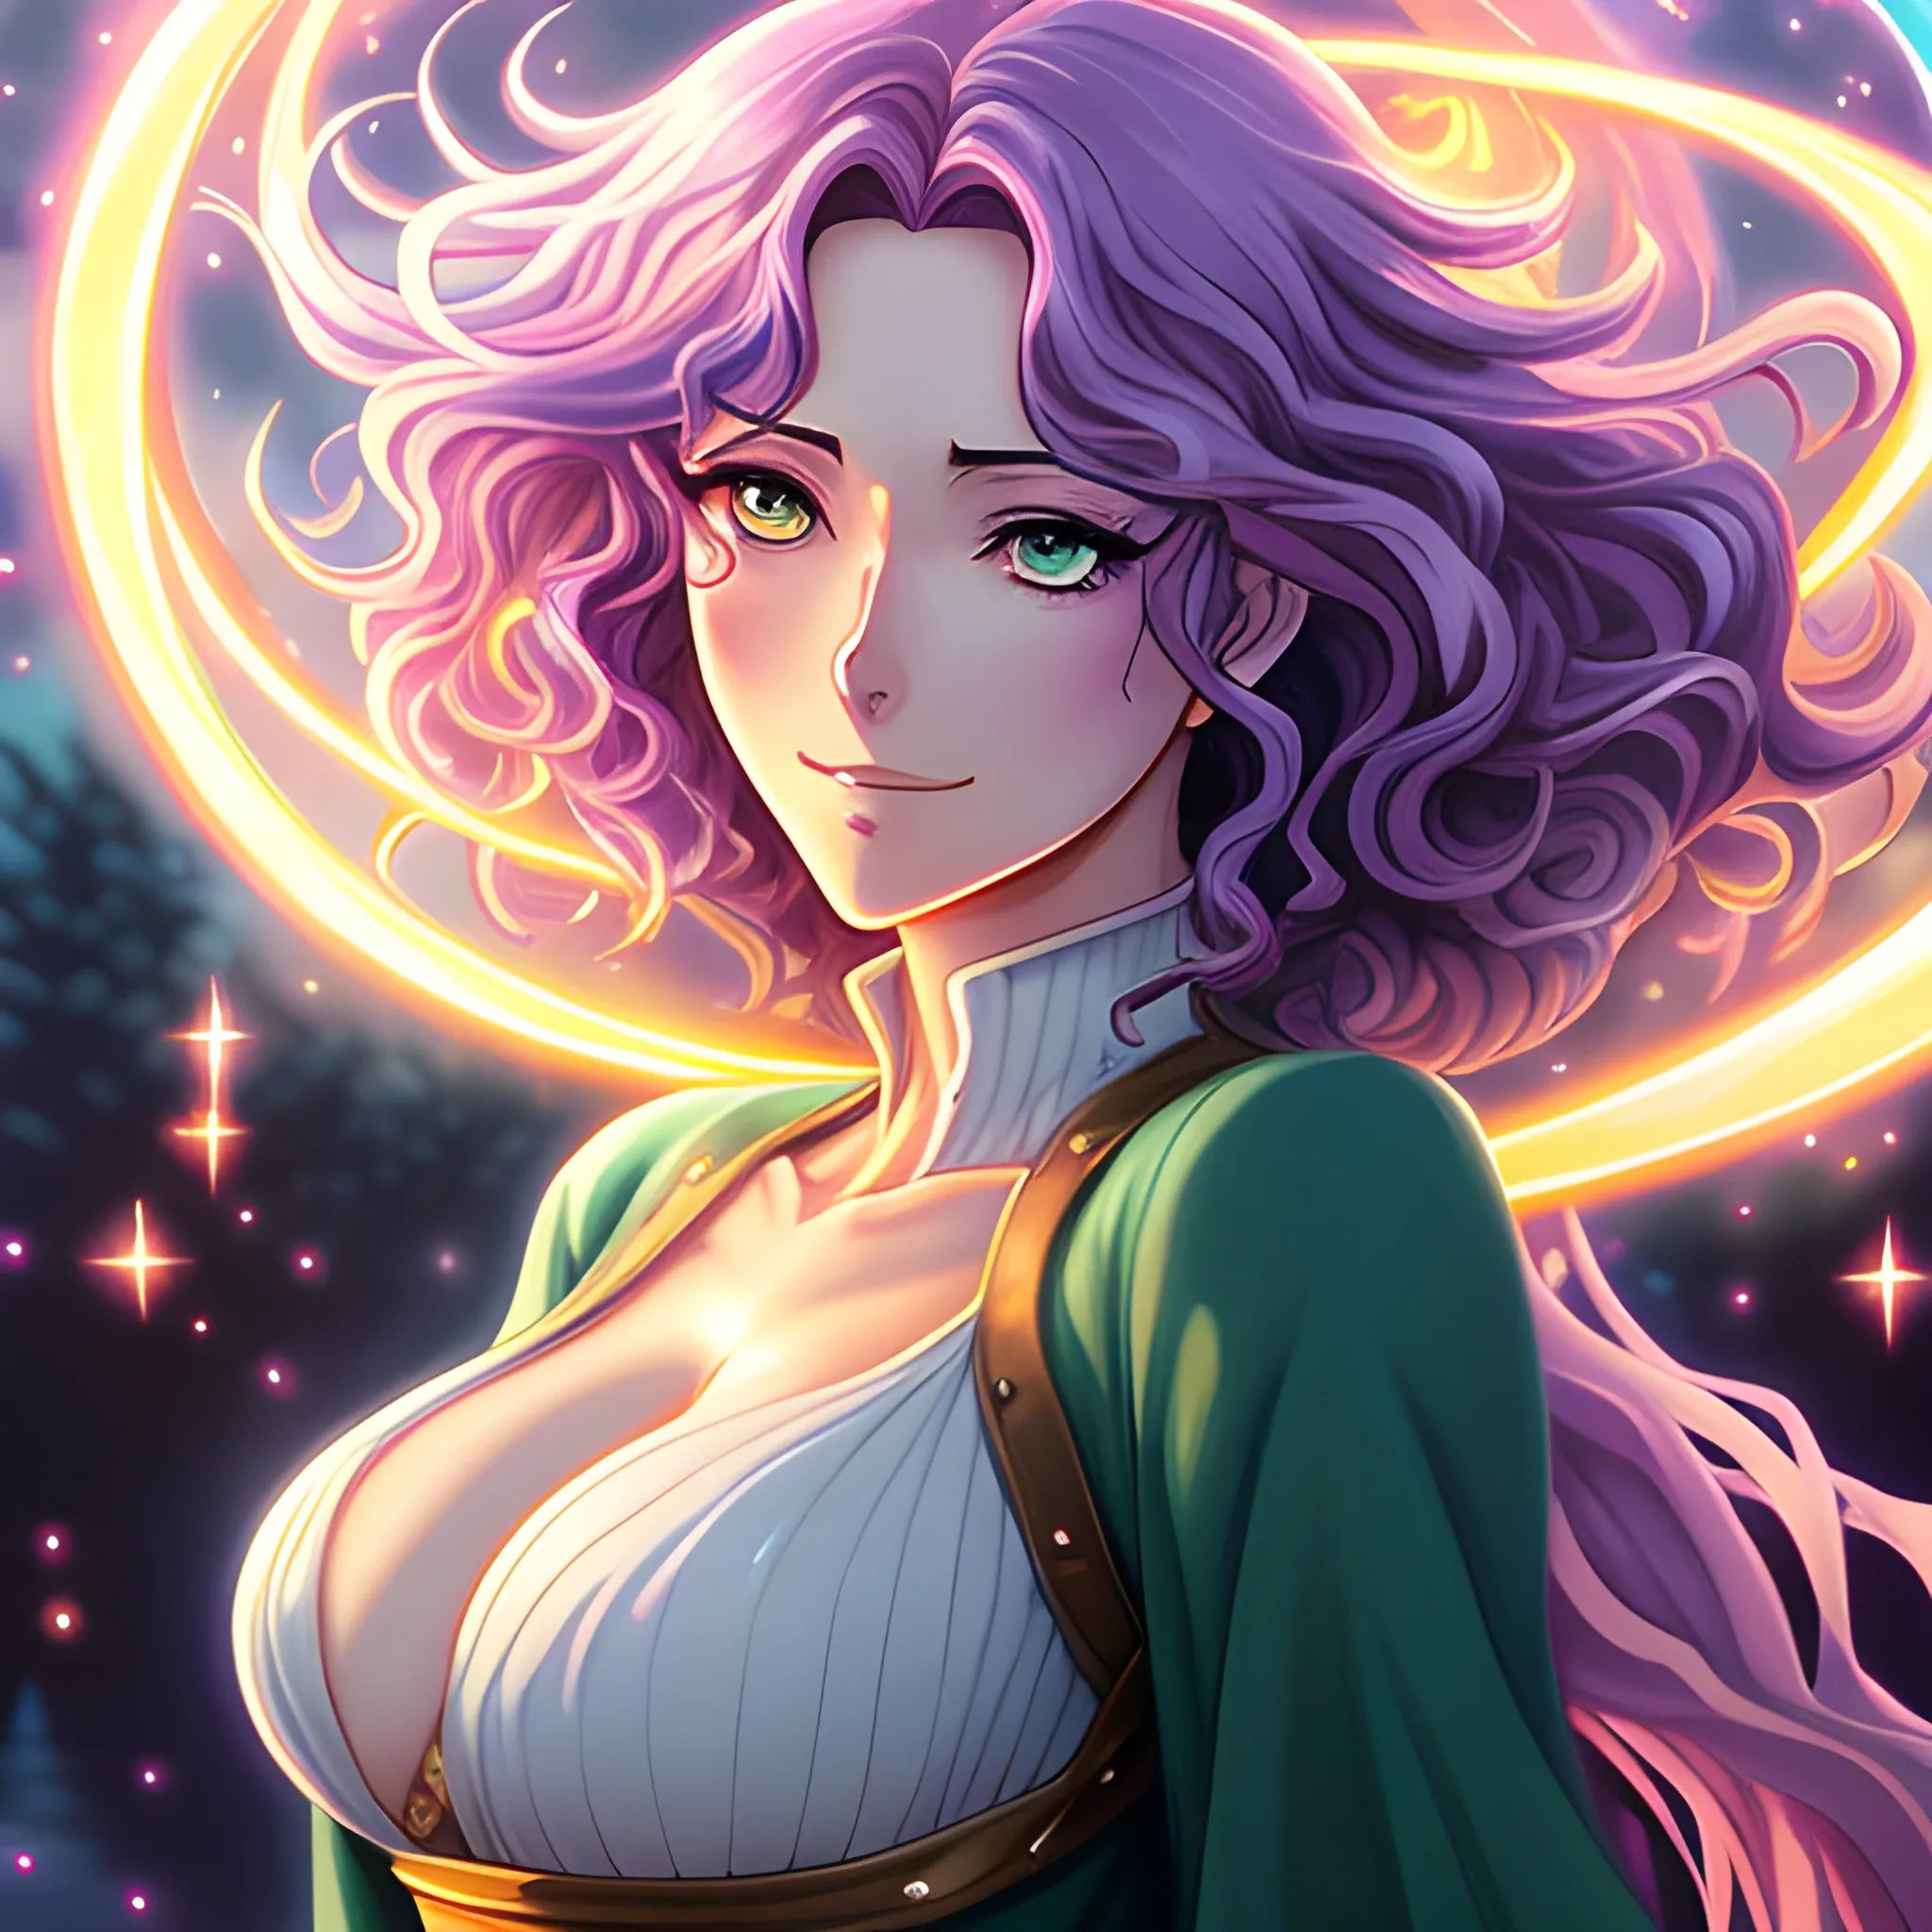 anime art  of  young teen girl who looks like at Sanni Mccandless, d&d magic fantasy, light curly hair, casting a bright large-scale magical spell around herself, a slightly sad look, highly detailed, digital painting, art by studio ghibli
